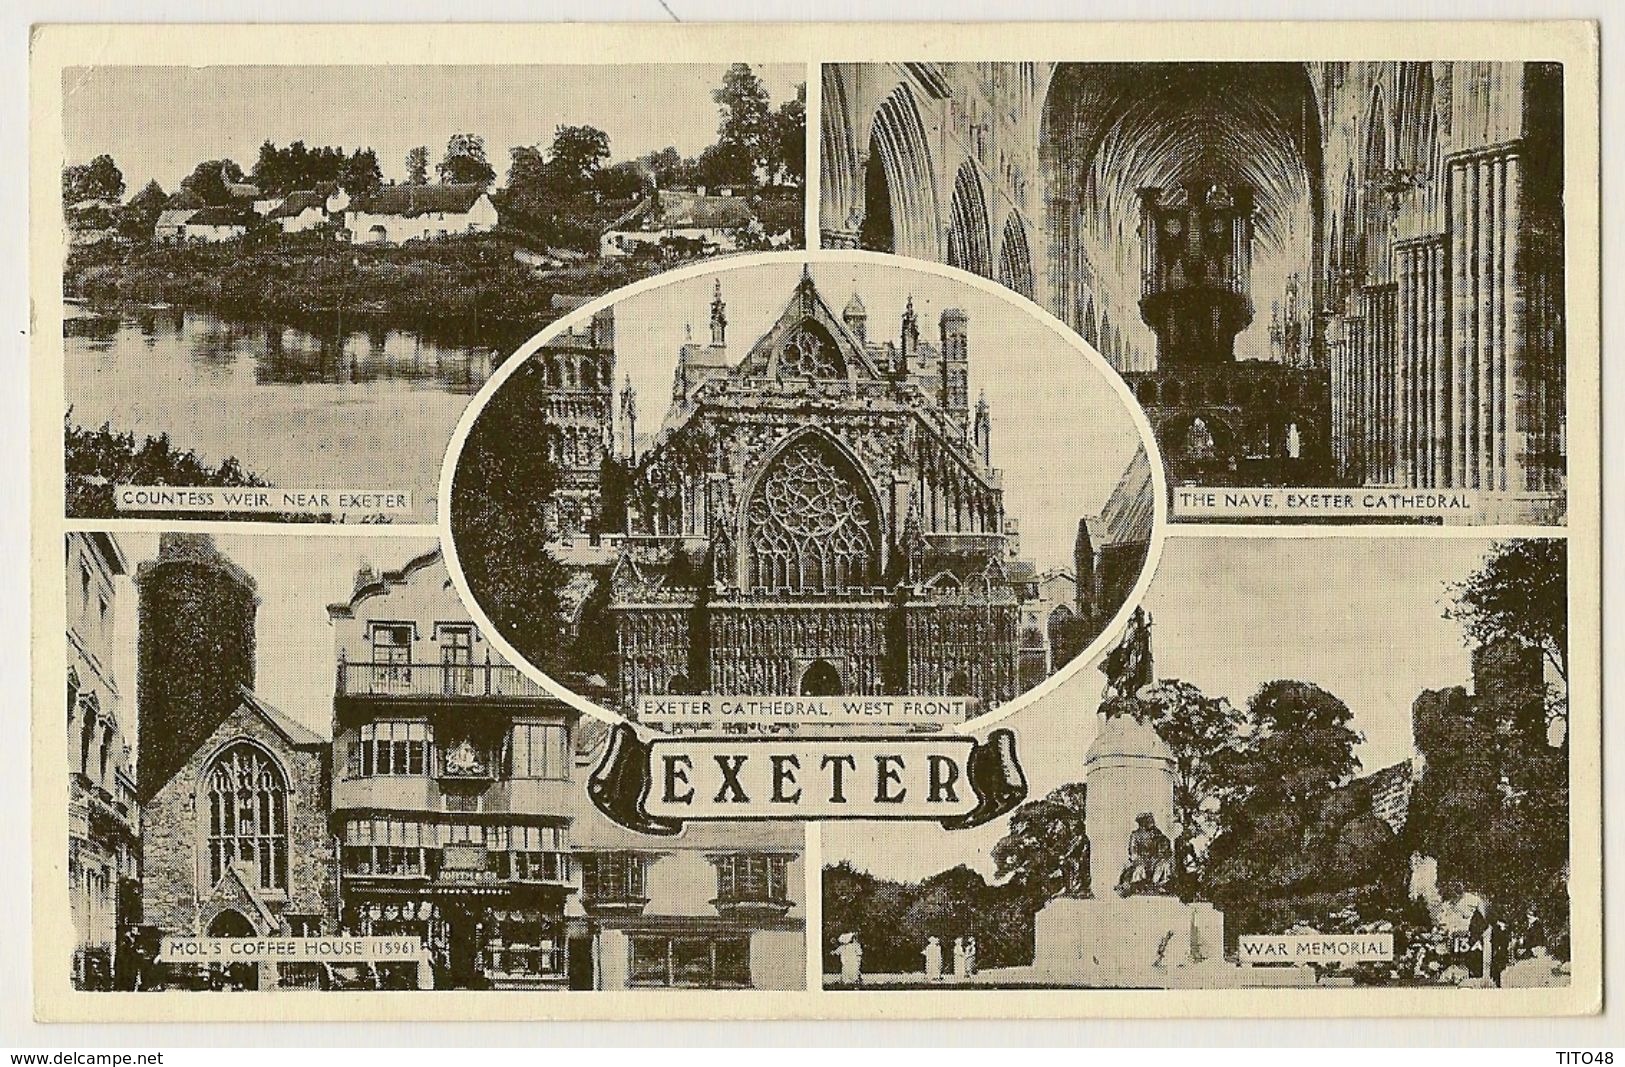 EXETER - Exeter